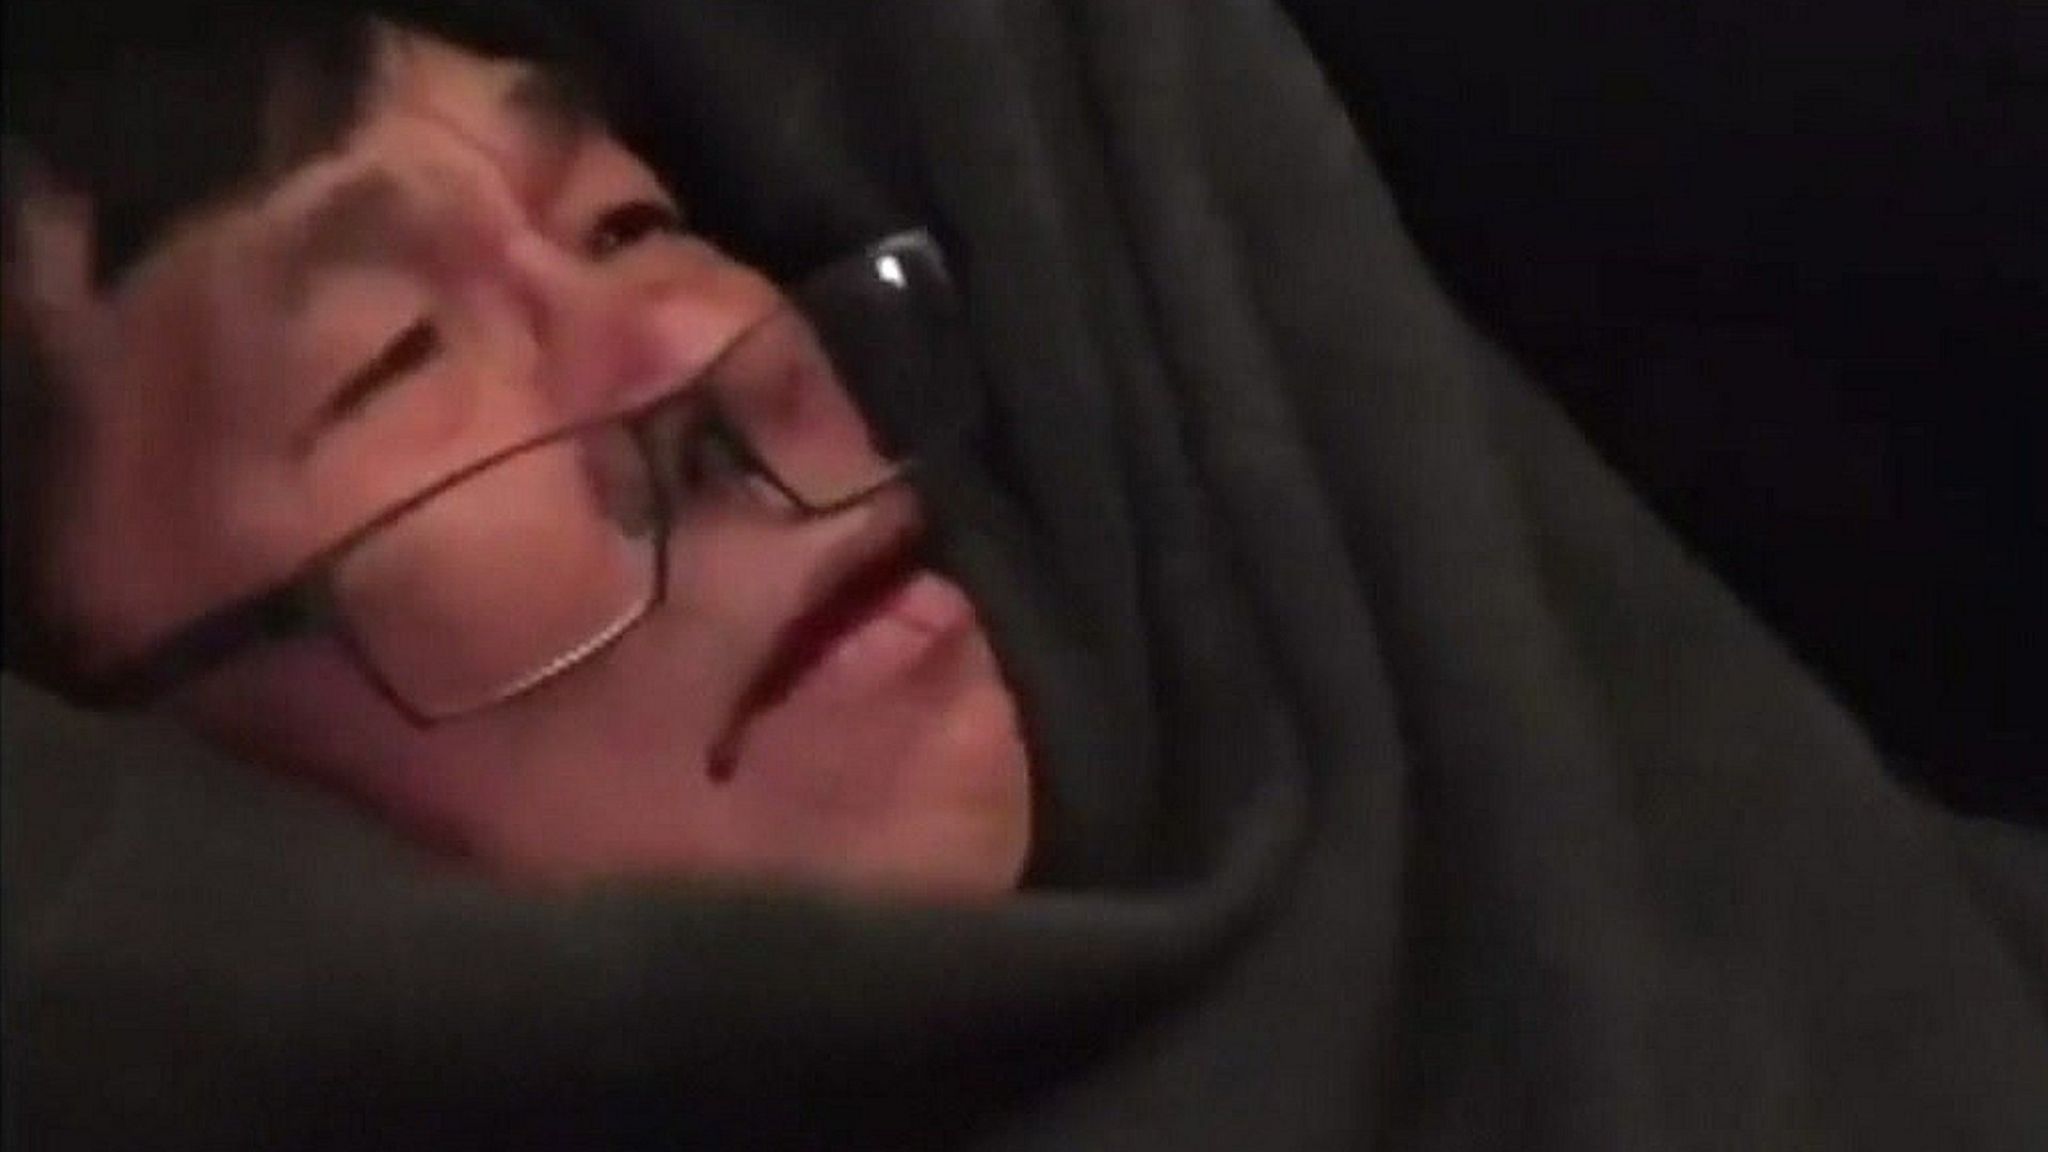 Passenger seen with glasses falling off and blood on his mouth